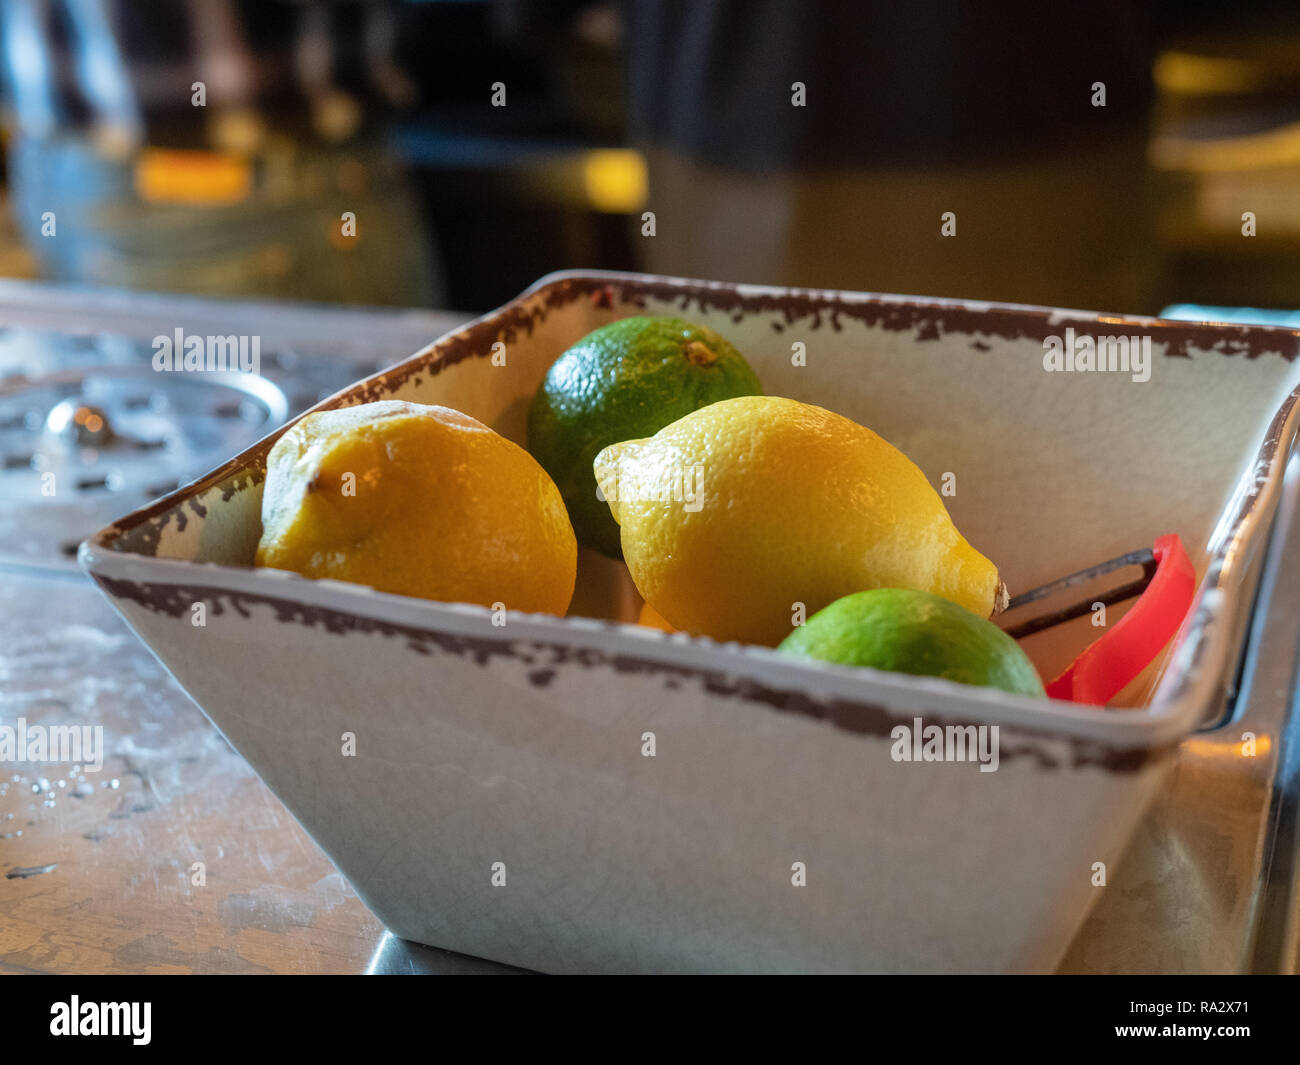 https://c8.alamy.com/comp/RA2X71/lemons-and-limes-with-peeler-sitting-in-bowl-of-a-bar-for-bartenders-to-make-cocktails-RA2X71.jpg